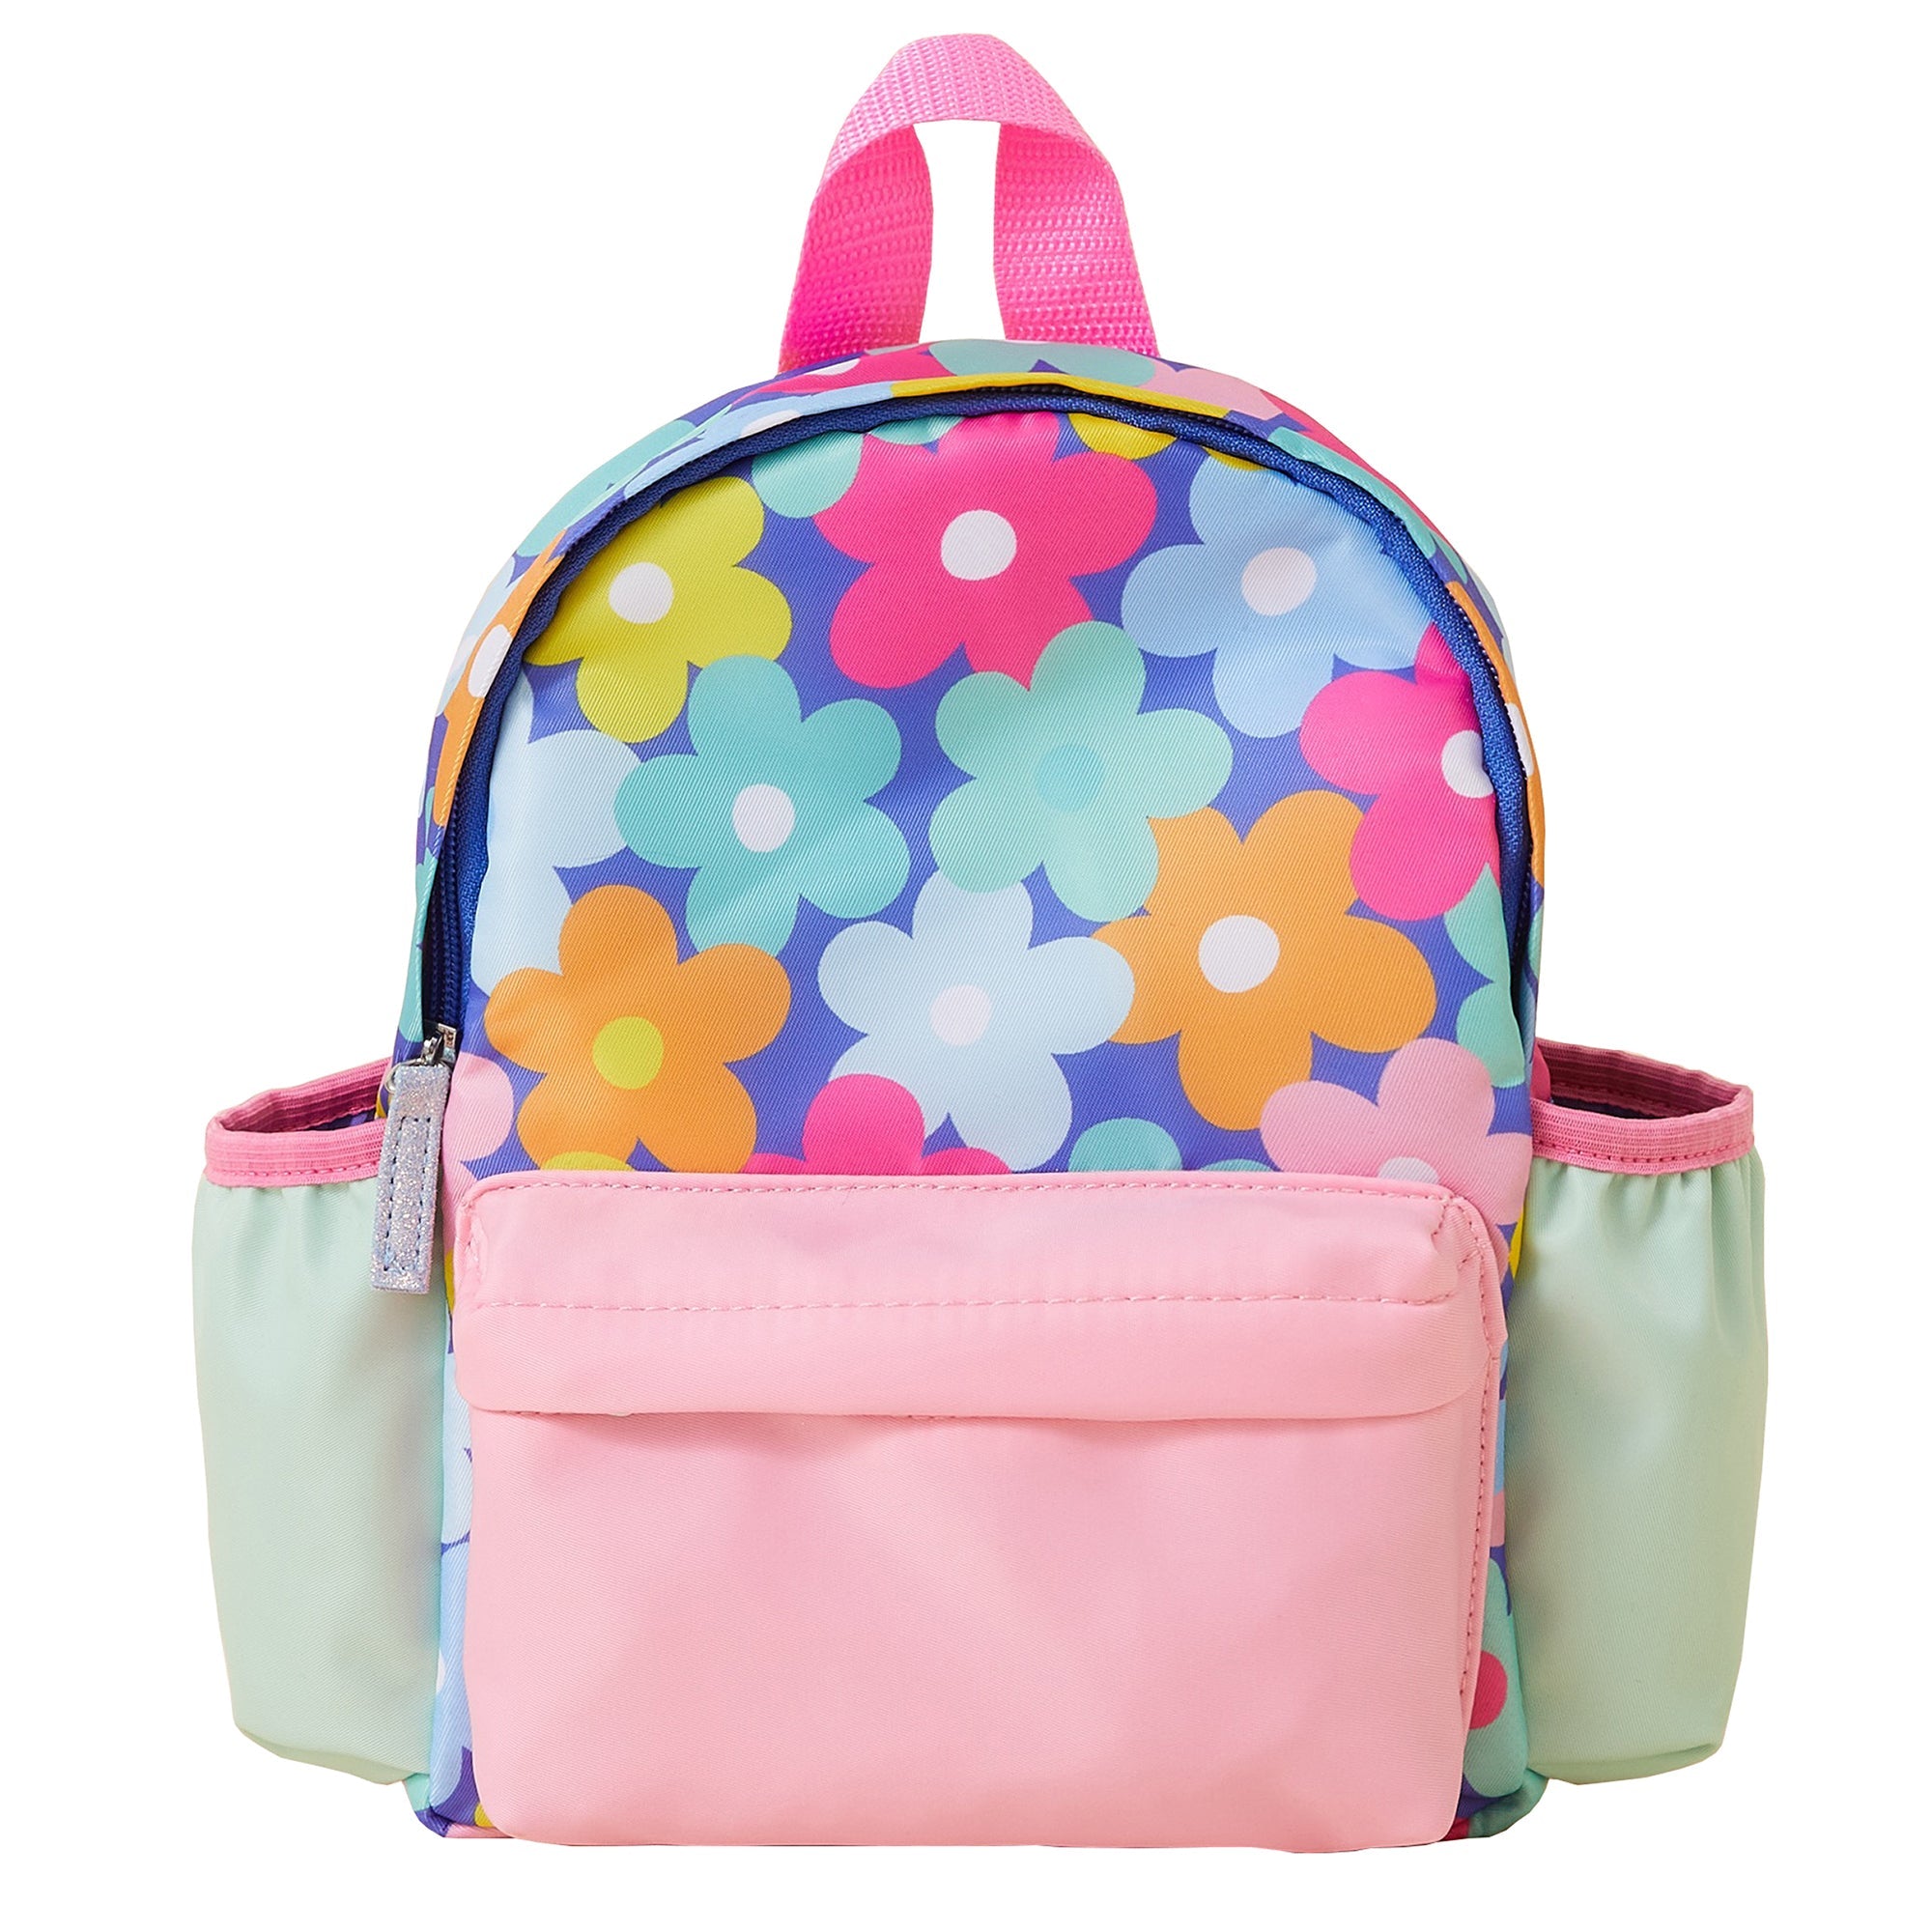 Accessorize London Girl's Retro Floral Backpack